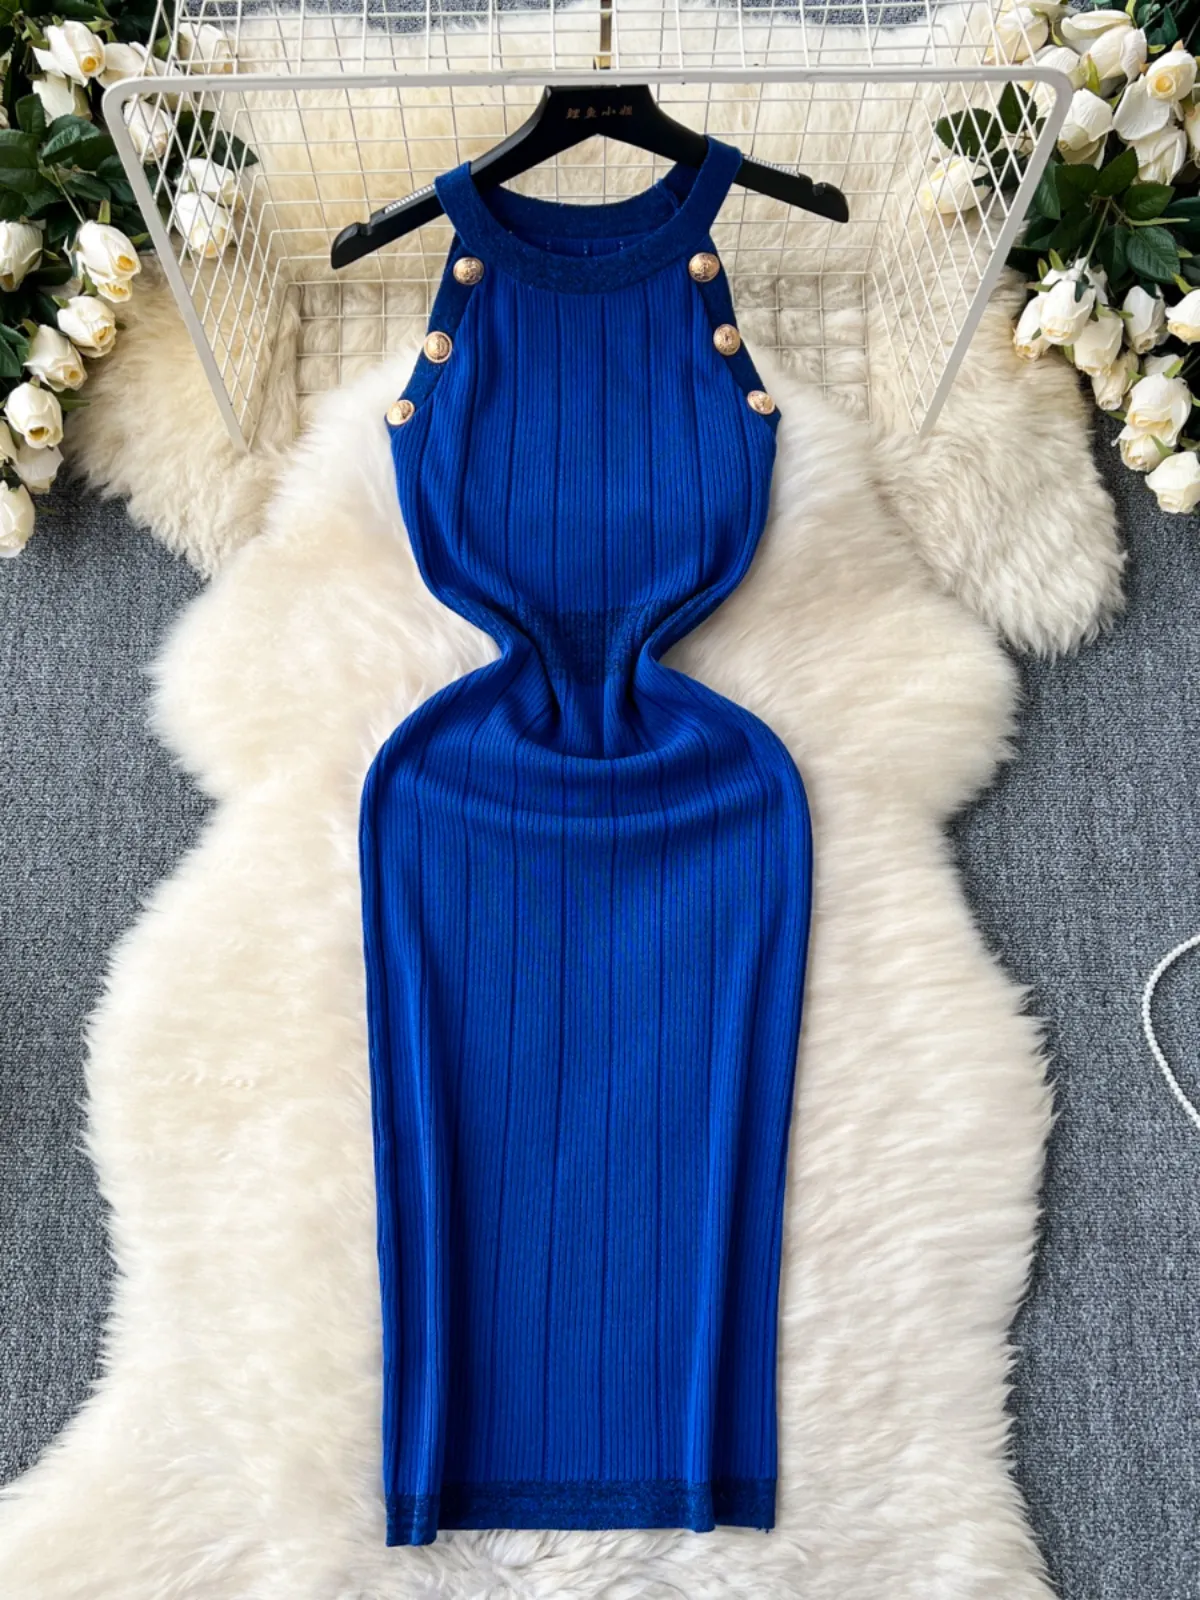 Qianjin style dress, female niche, high-end, socialite temperament, sleeveless neck hanging, slim fit, buttocks wrapped skirt, French knit skirt